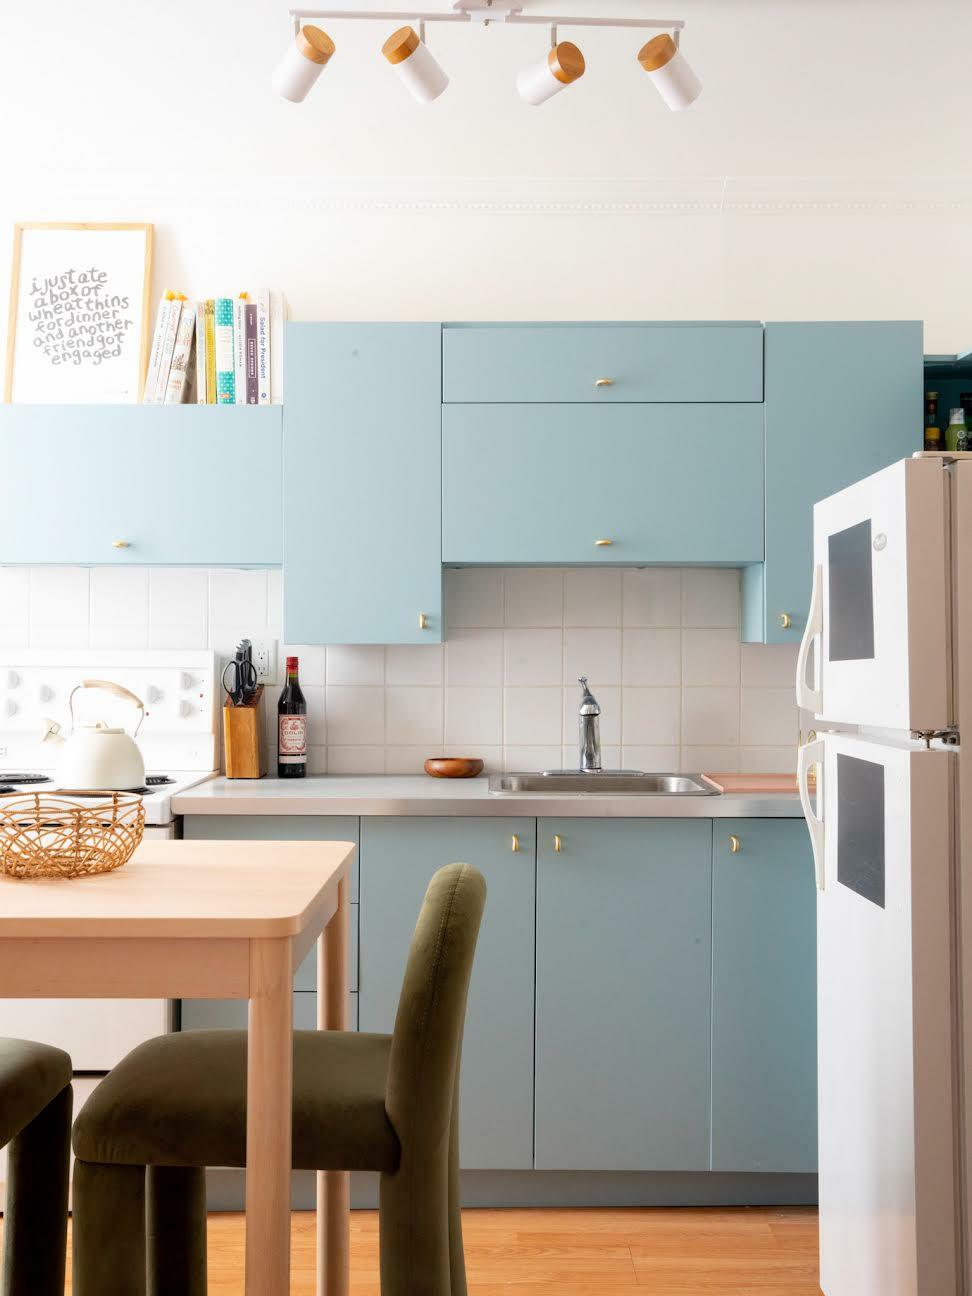 A serene kitchen with ice blue cabinetry